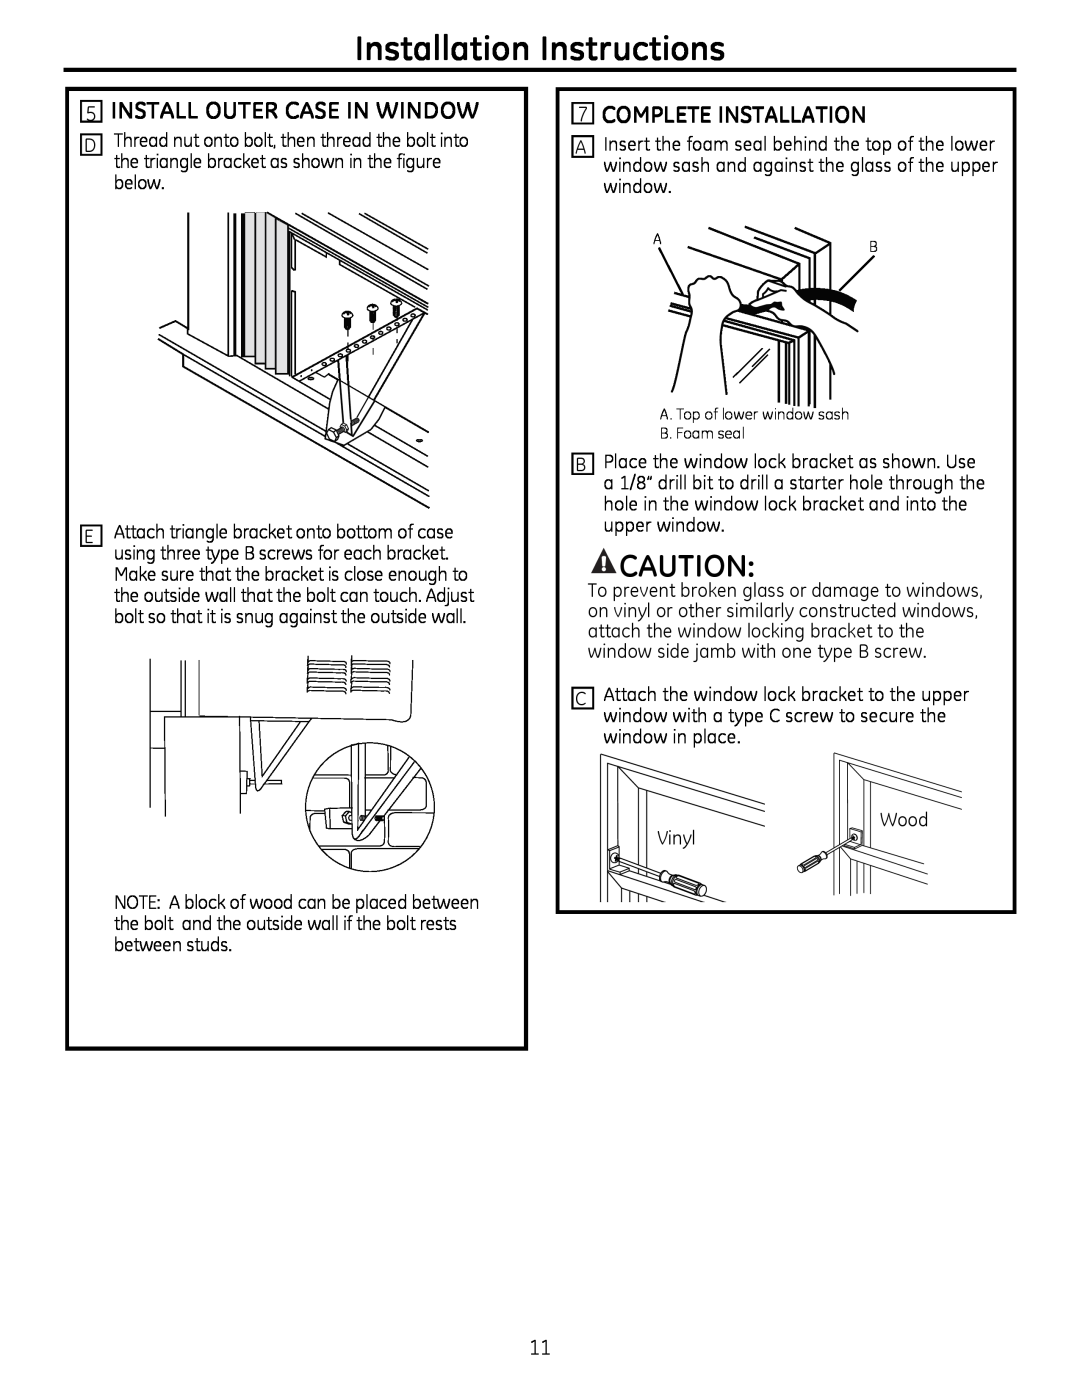 GE AHH24, AHM24 installation instructions Install Outer Case In Window, 7COMPLETE INSTALLATION, Installation Instructions 